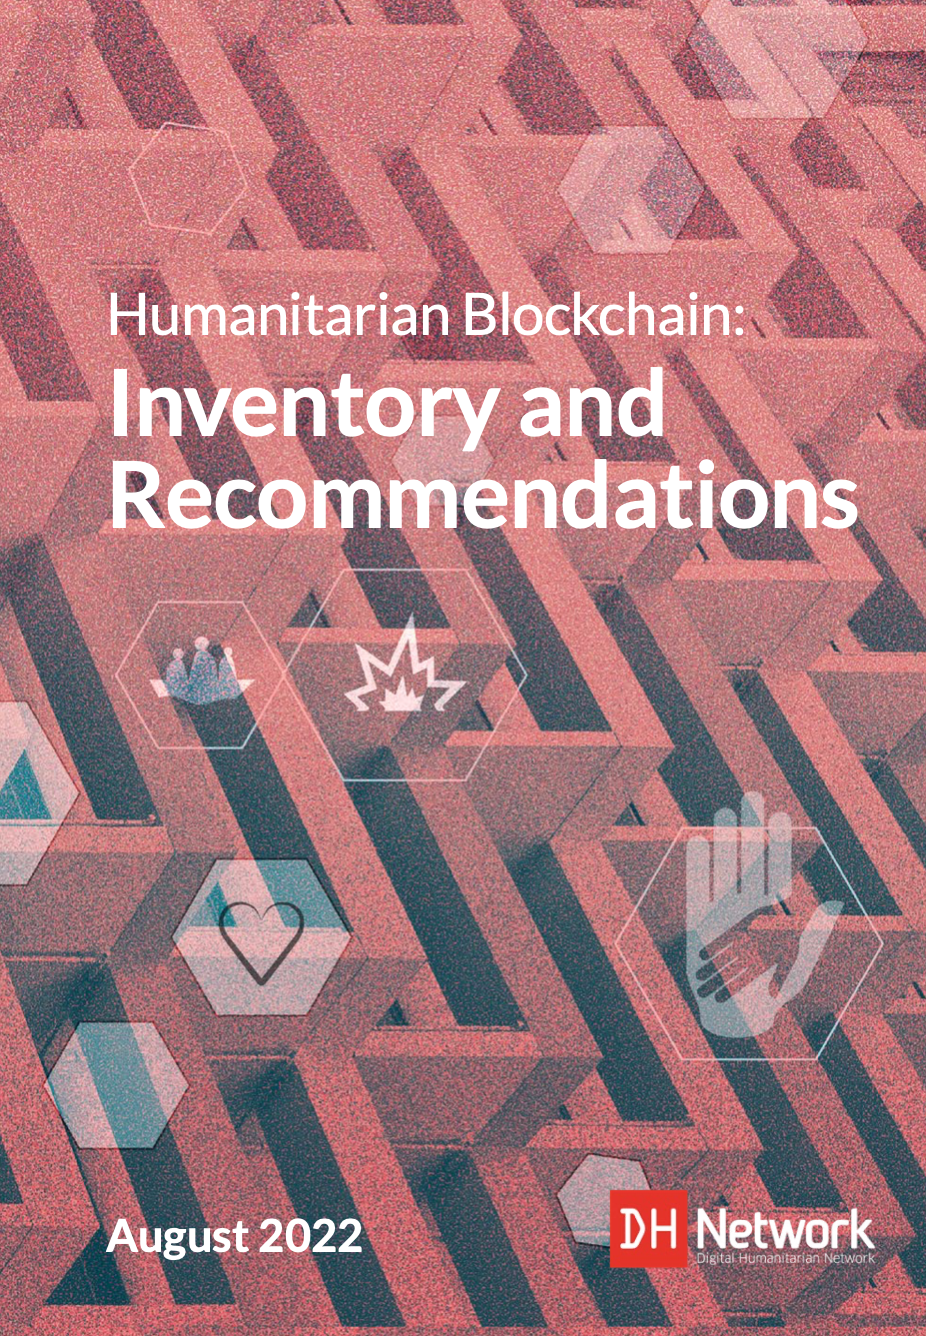 Humanitarian Blockchain - Inventory and Recommendations - August 2022